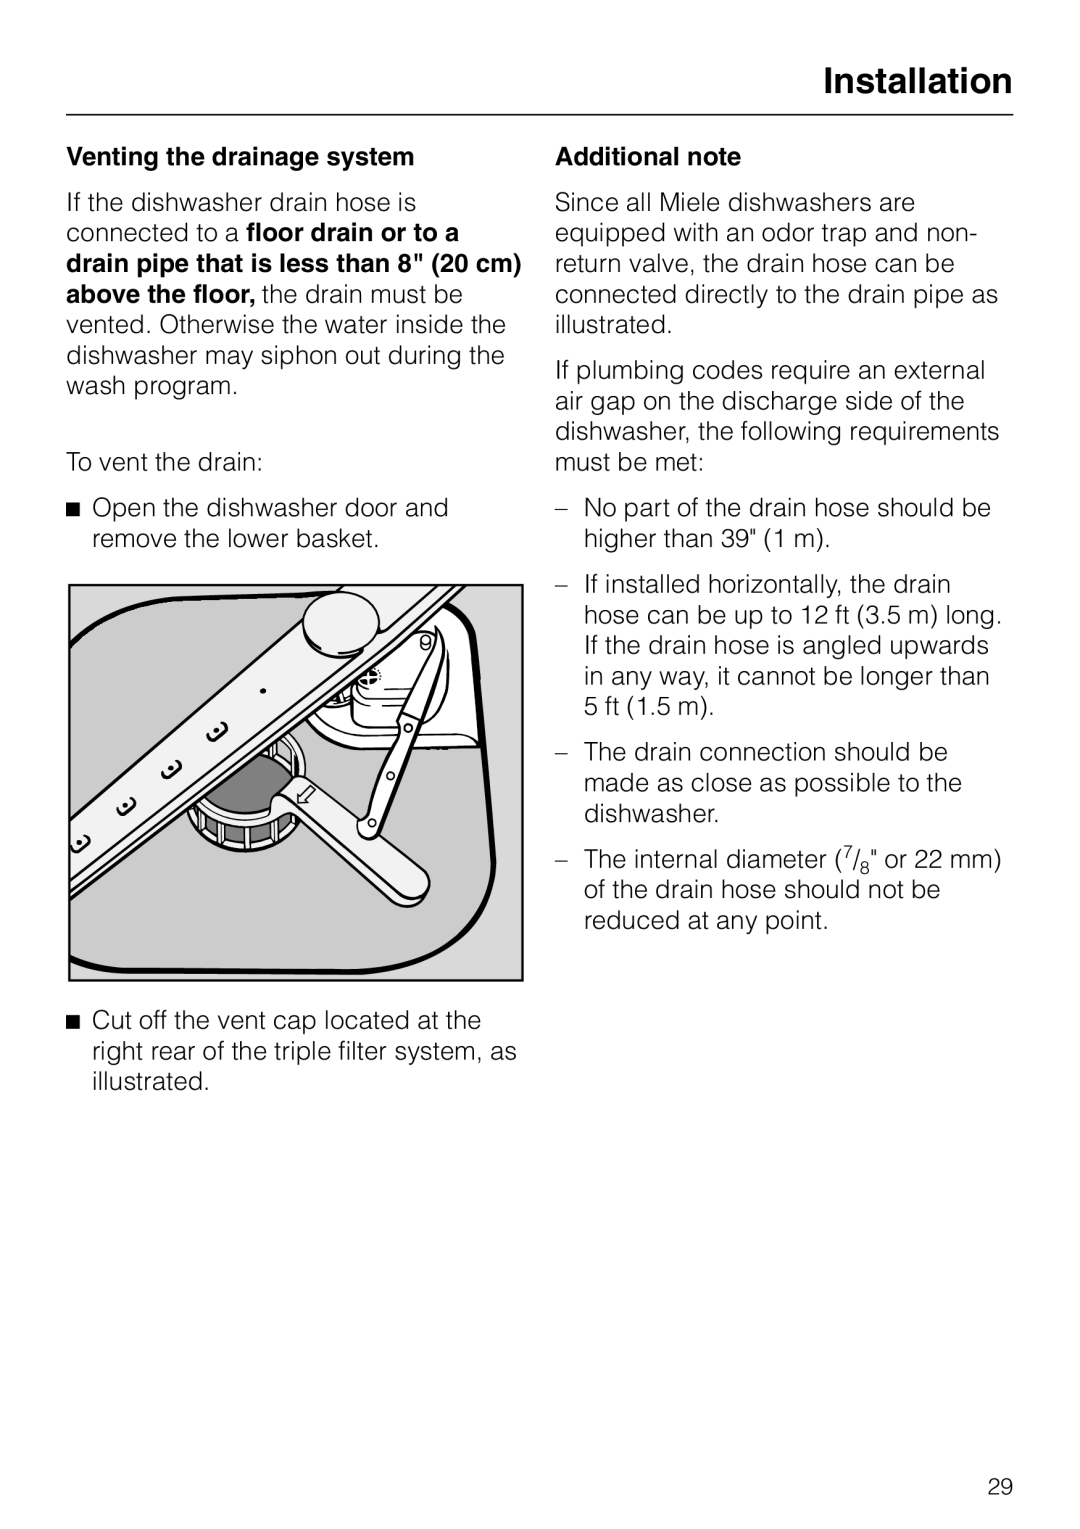 Miele HG01 installation instructions Venting the drainage system, Additional note, Installation 